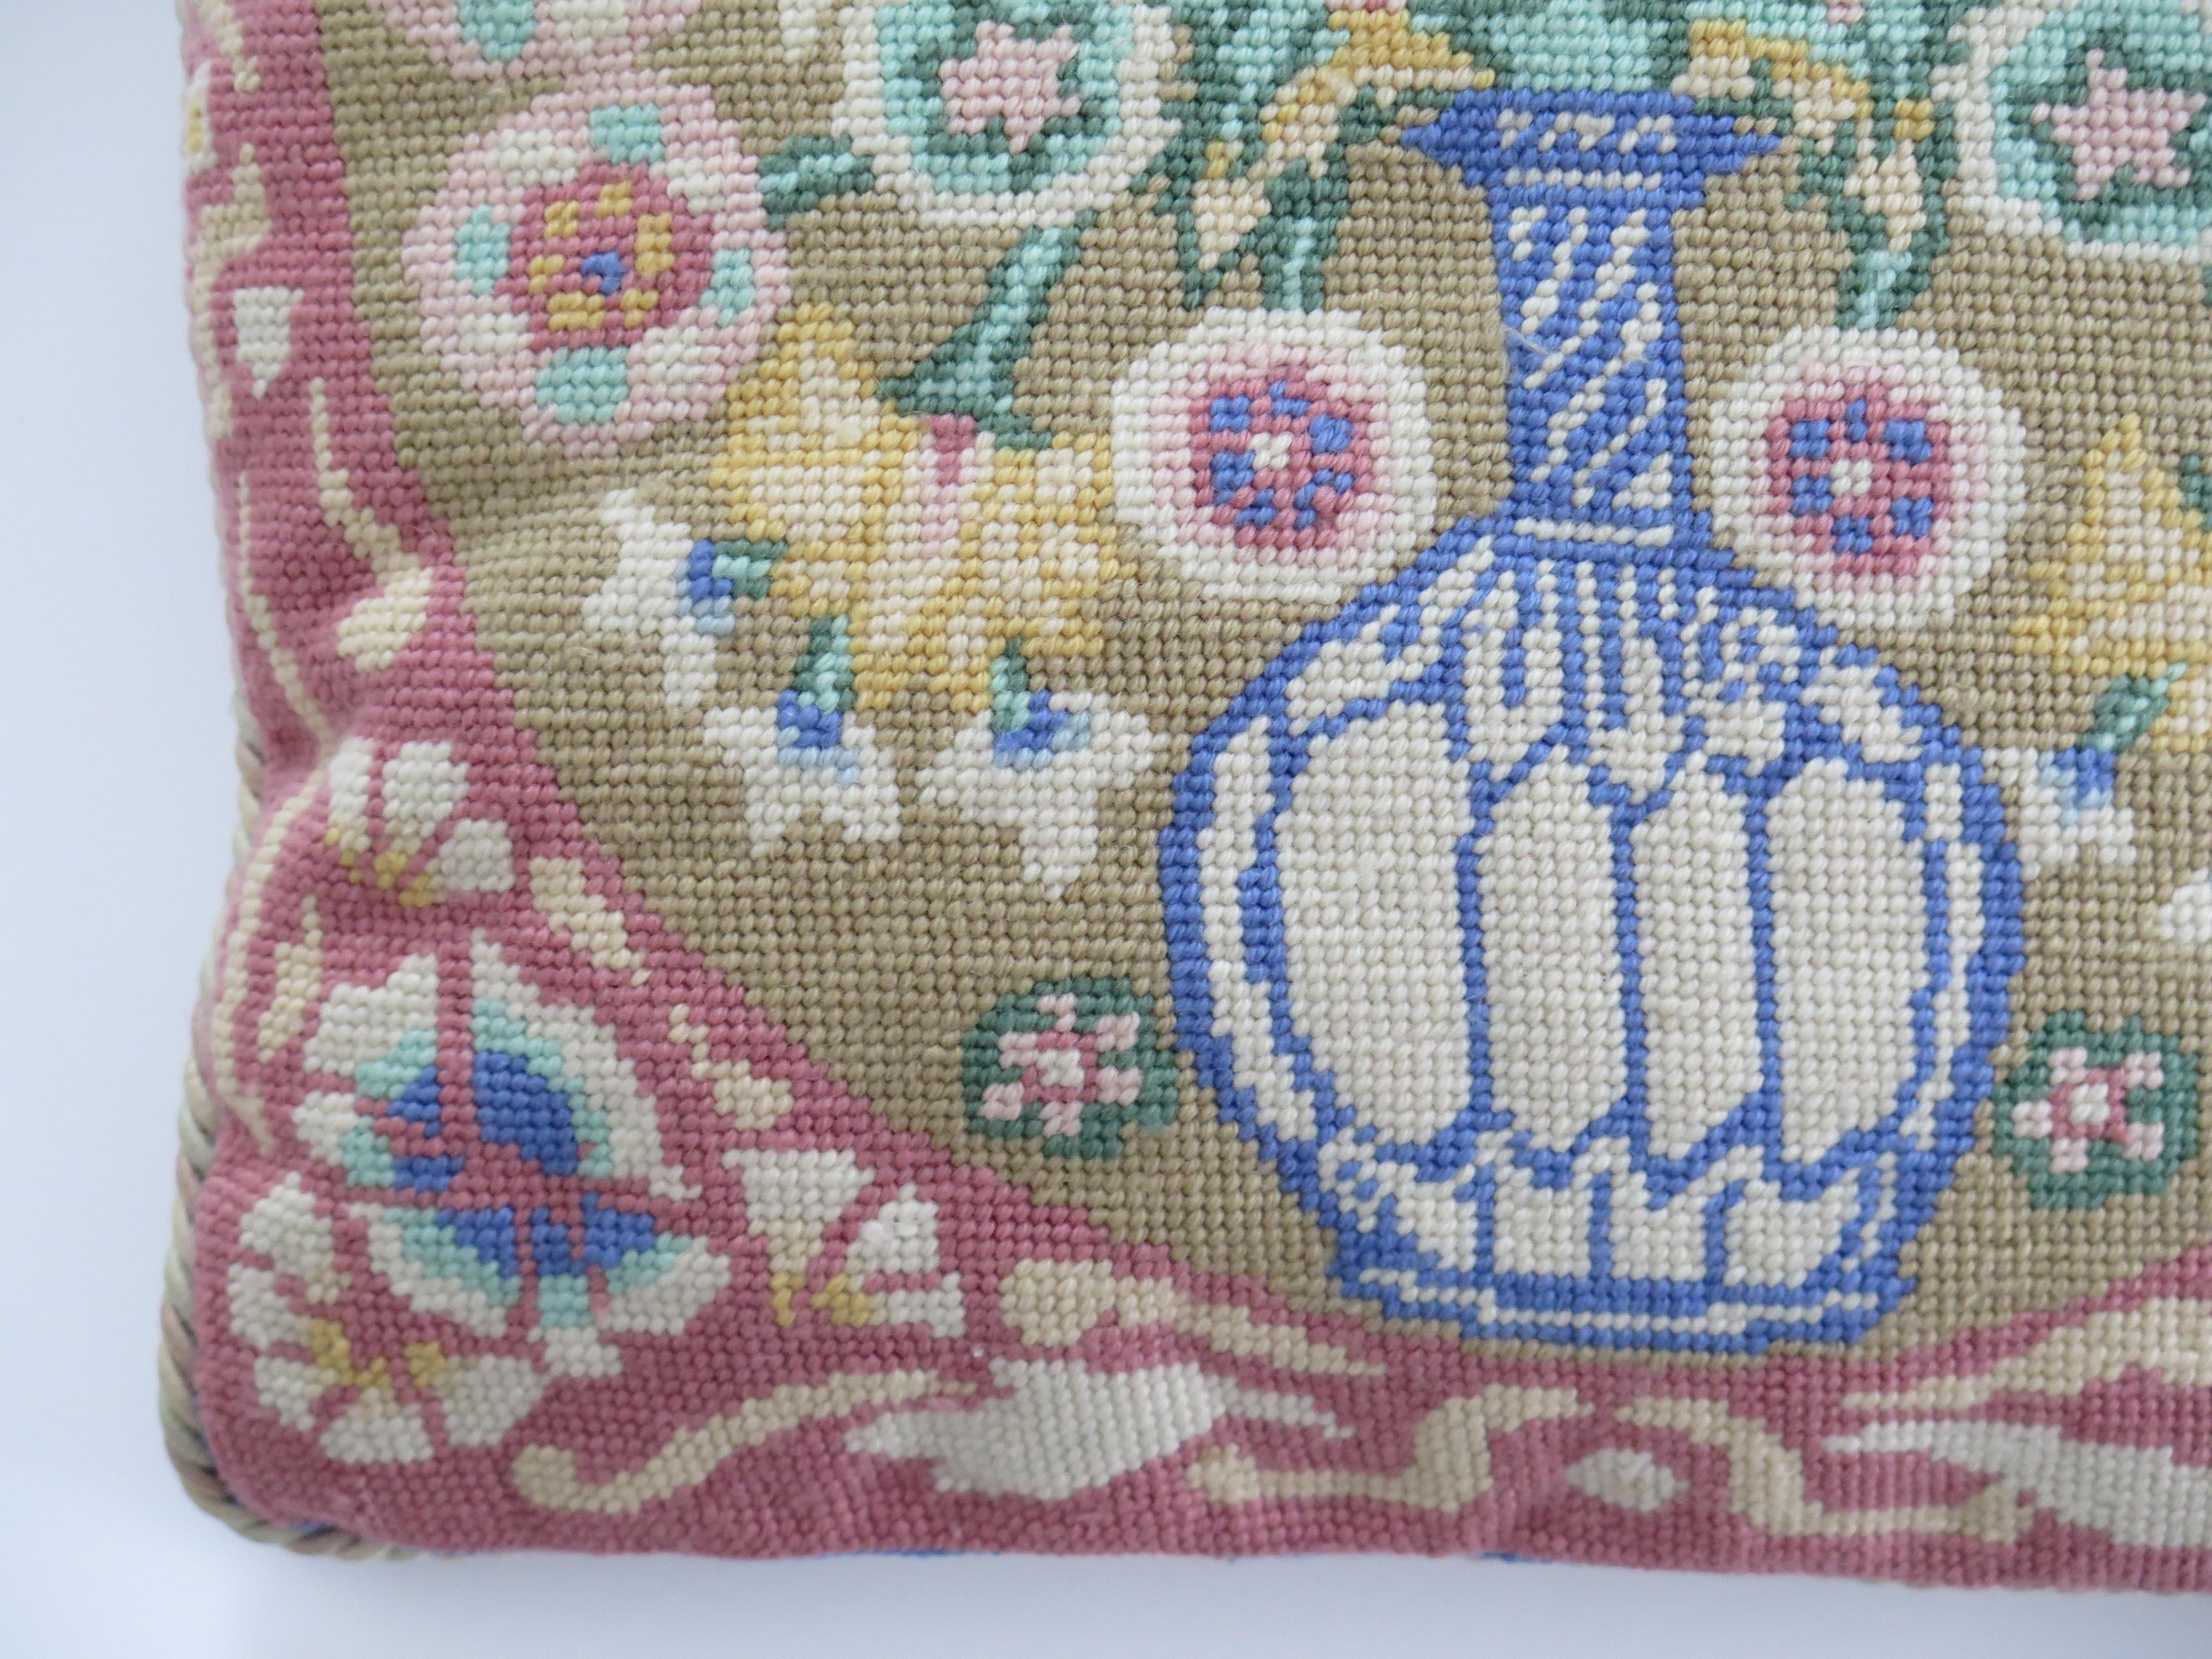 Woven Cushion or Pillow with Flower Vase pattern in pastel shades, Circa 1930s In Good Condition For Sale In Lincoln, Lincolnshire